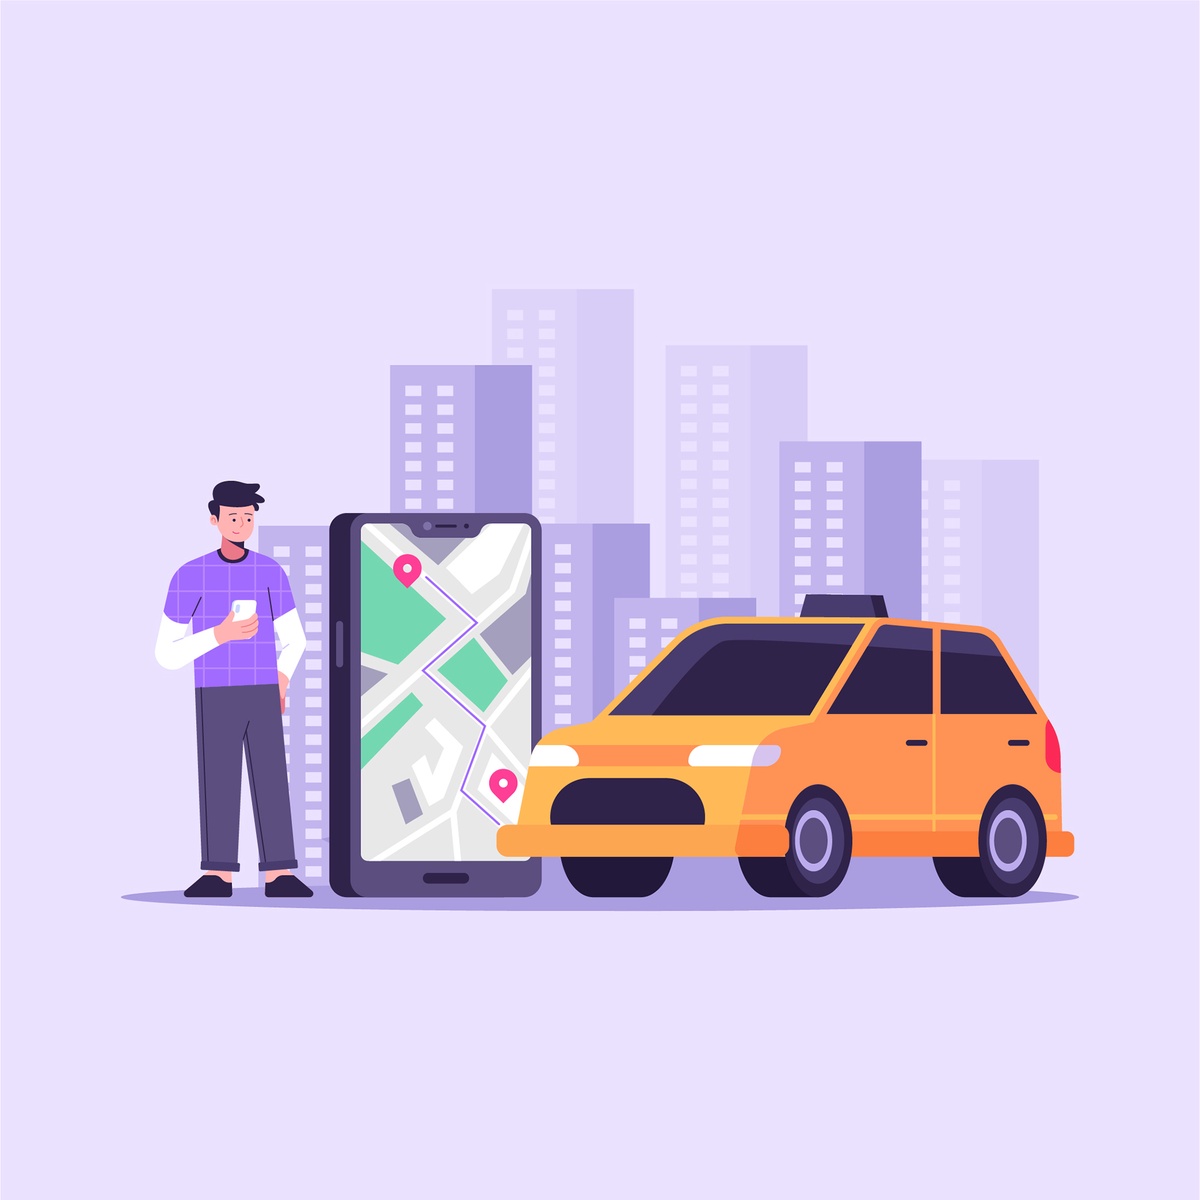 What Are the Benefits of Developing an On-Demand Roadside Assistance Mobile App?